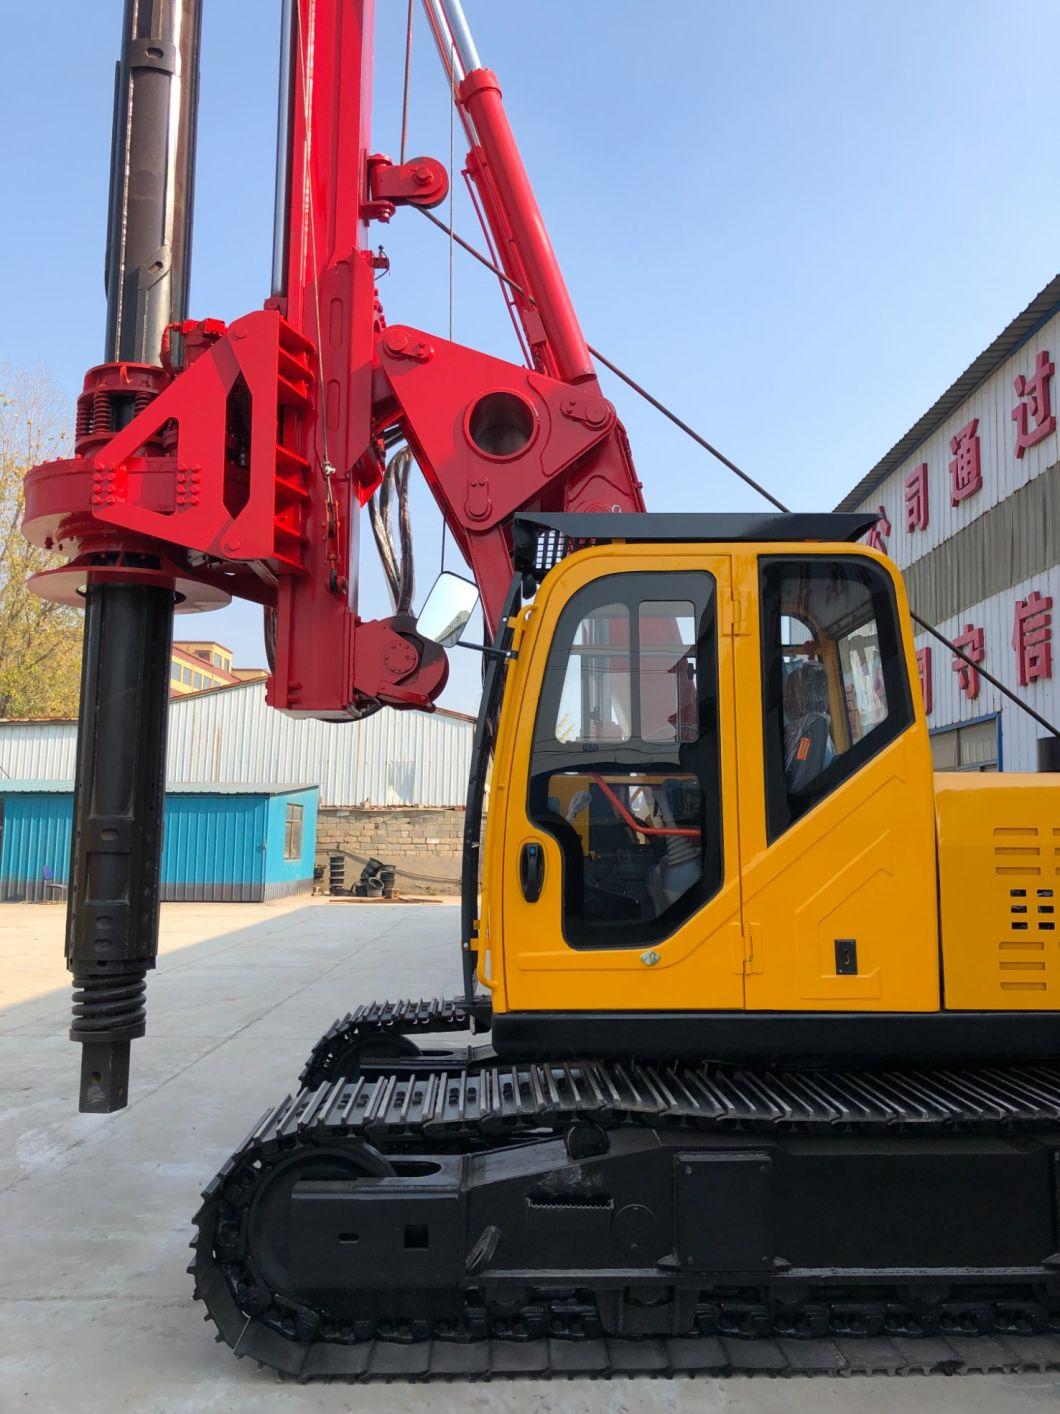 5-60m Manufacturer Construction Machinery Crawler Dr-220 Economical Water Well Rotary Drilling Rig for Sale